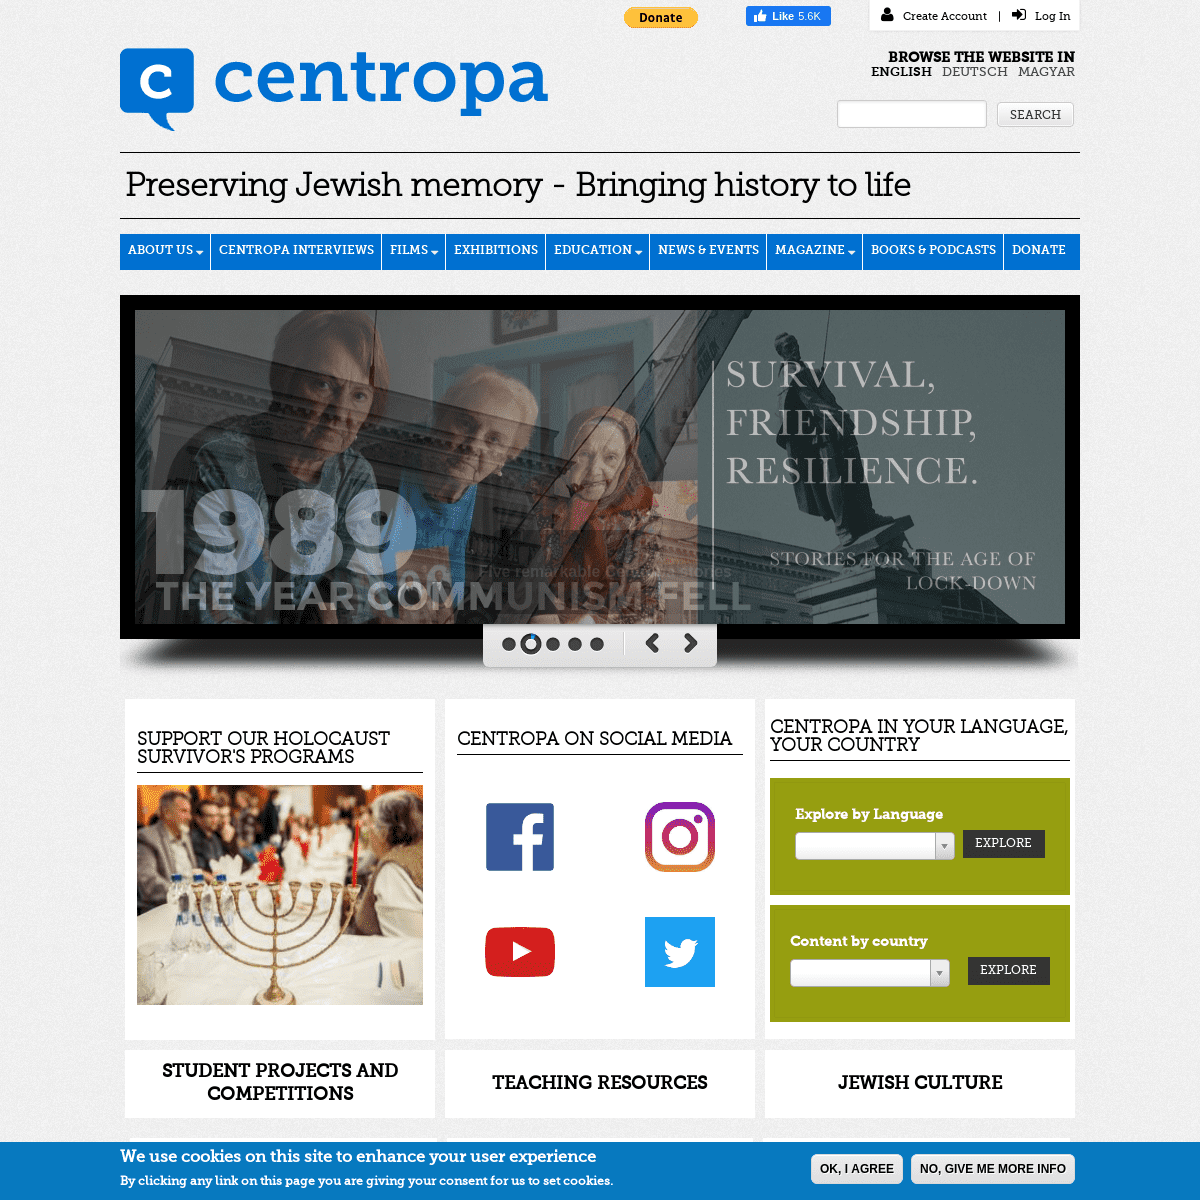 A complete backup of centropa.org